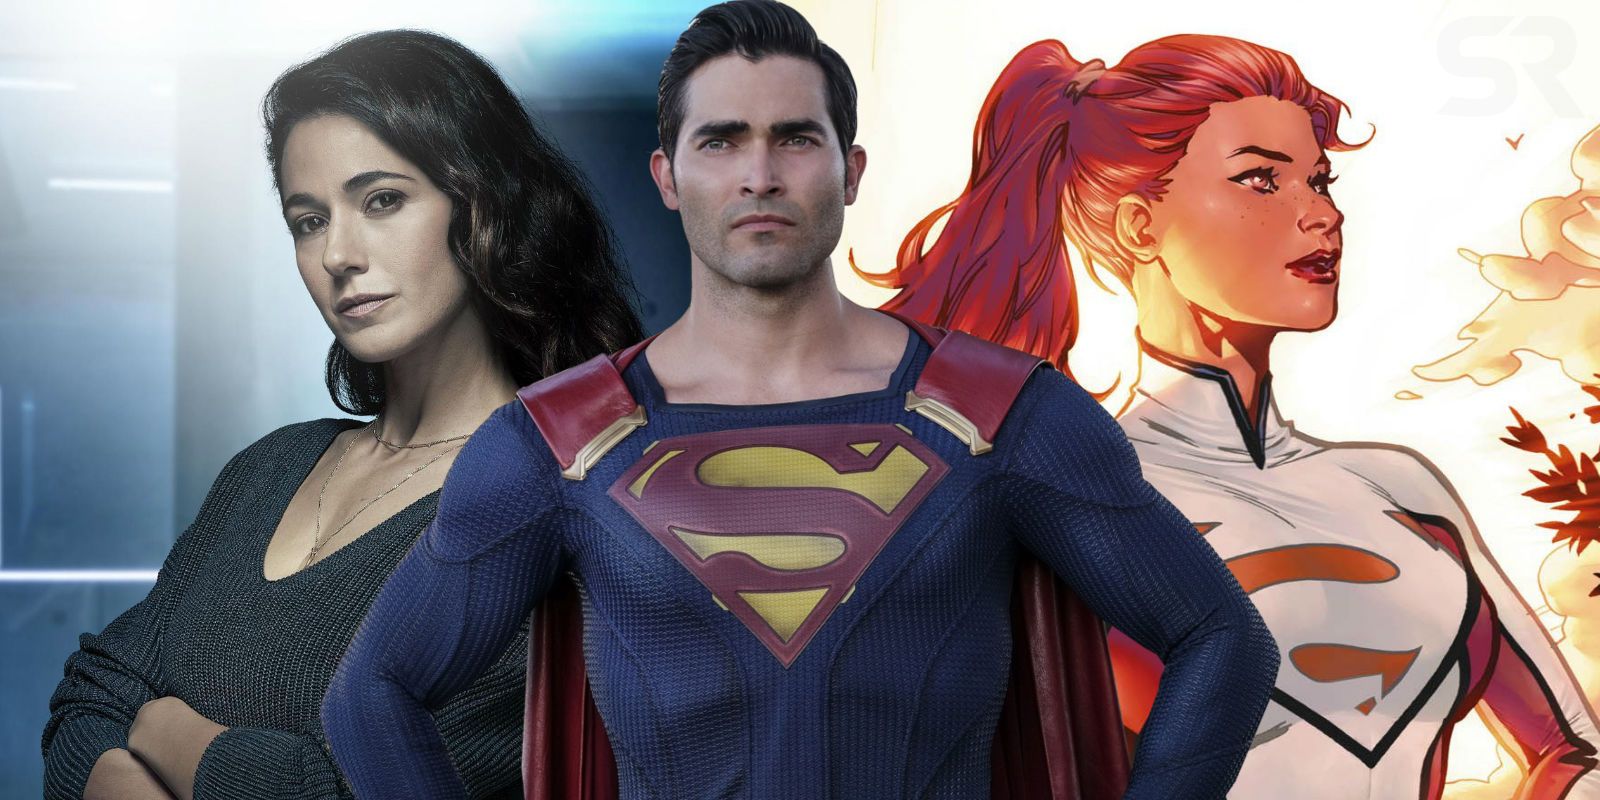 Arrowverse Spinoff Superman And Lois Casts Emmanuelle Chriqui As Lana Lang